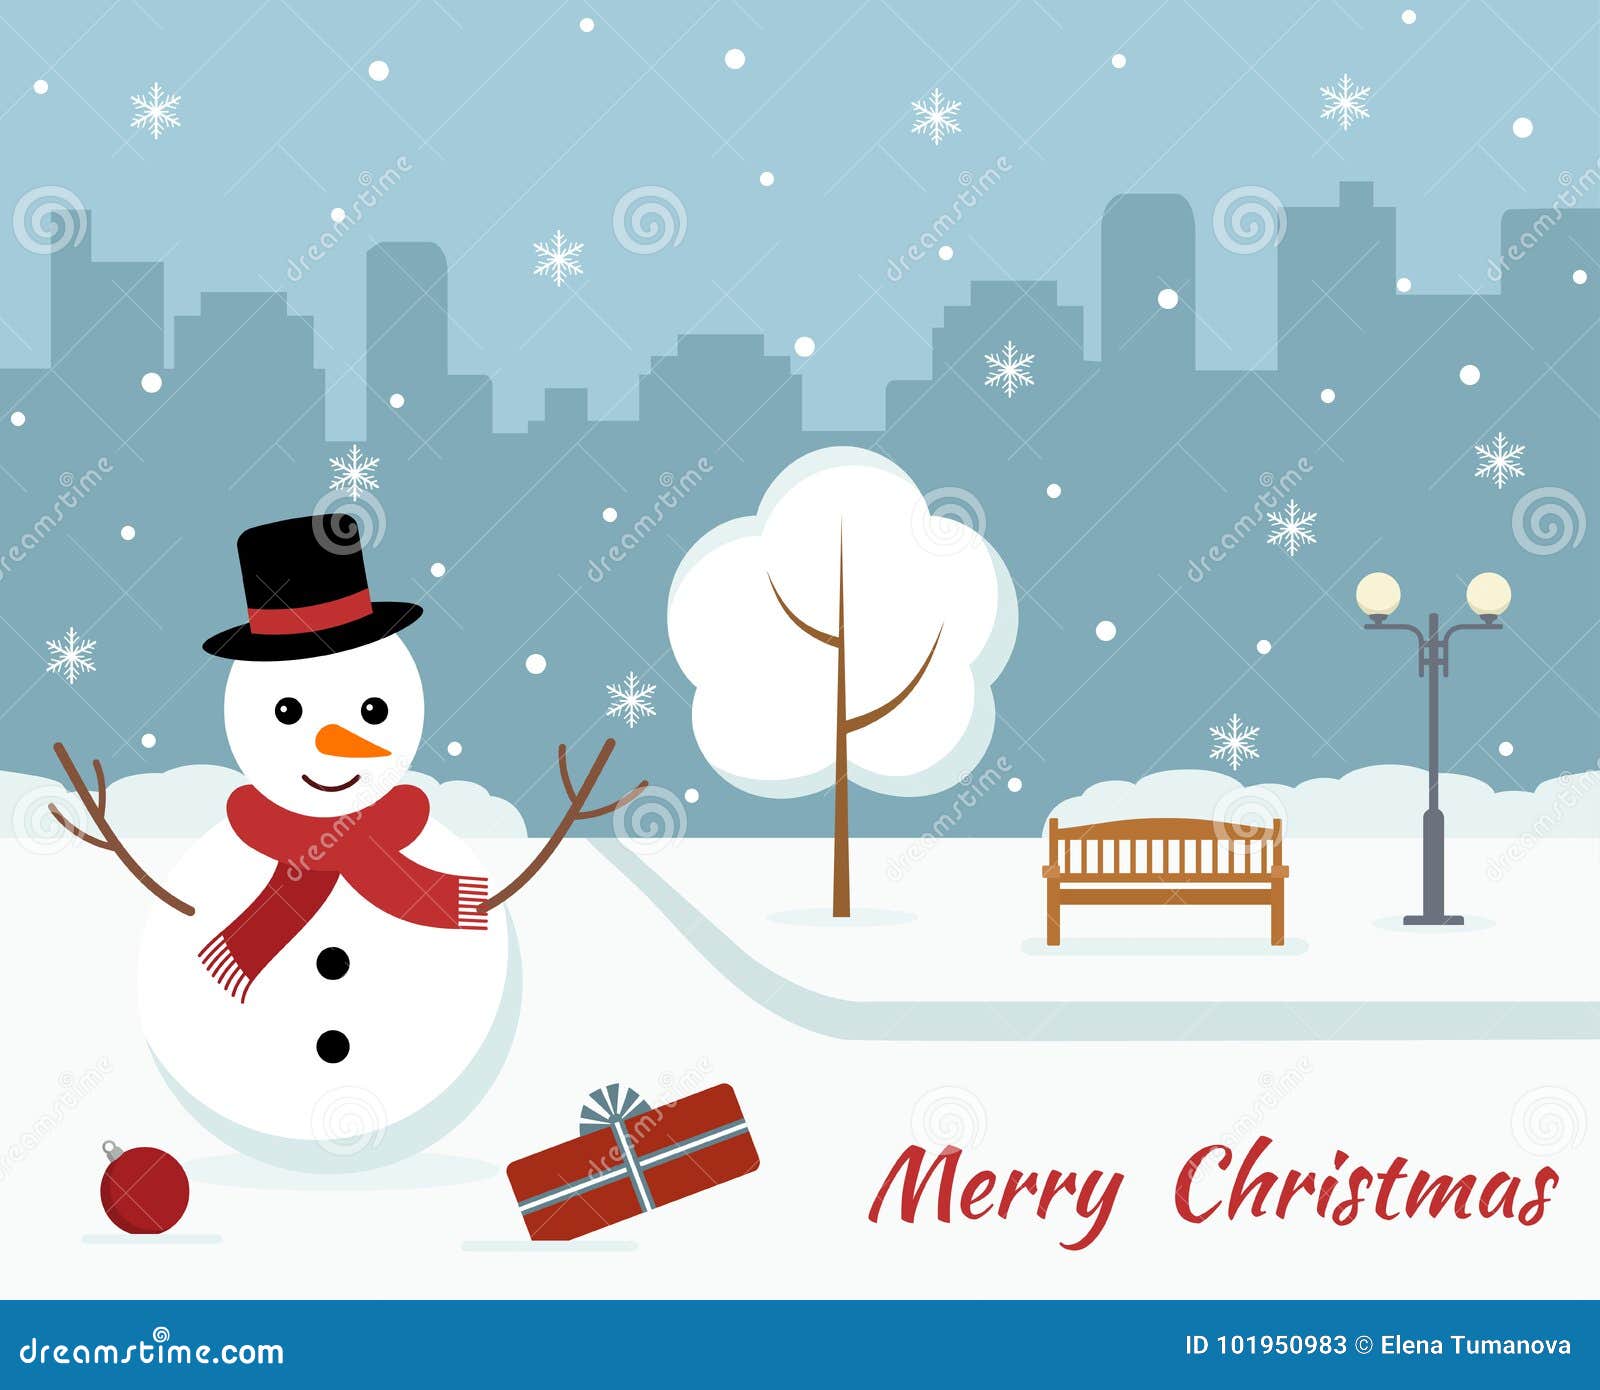 Christmas card with a cute snowman on city background